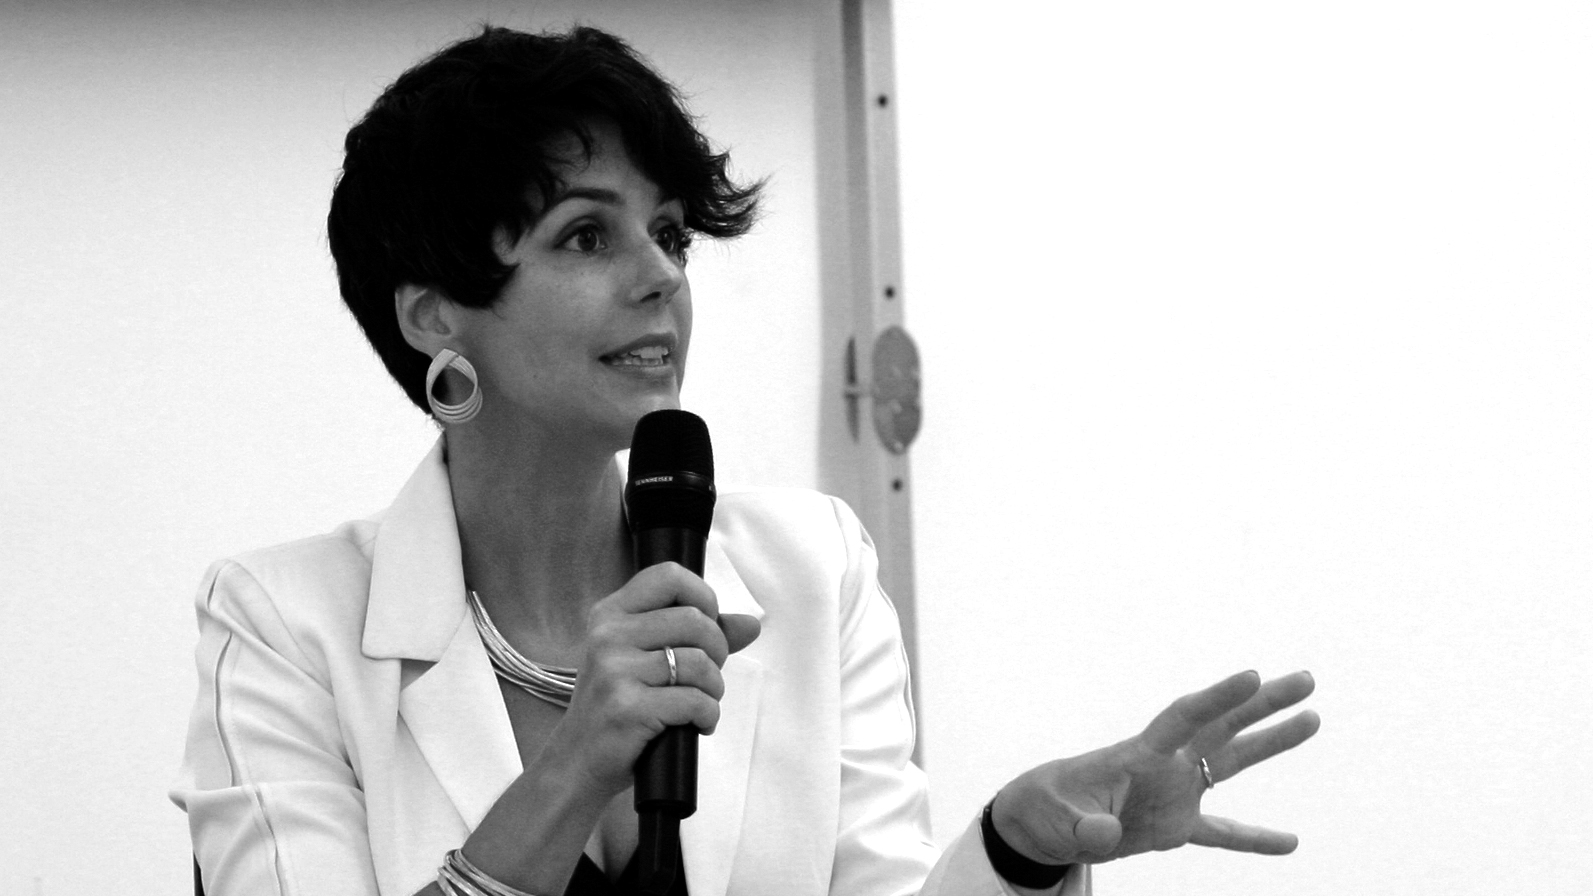 Julia Mourão Permoser at a roundtable discussion on irregular migration